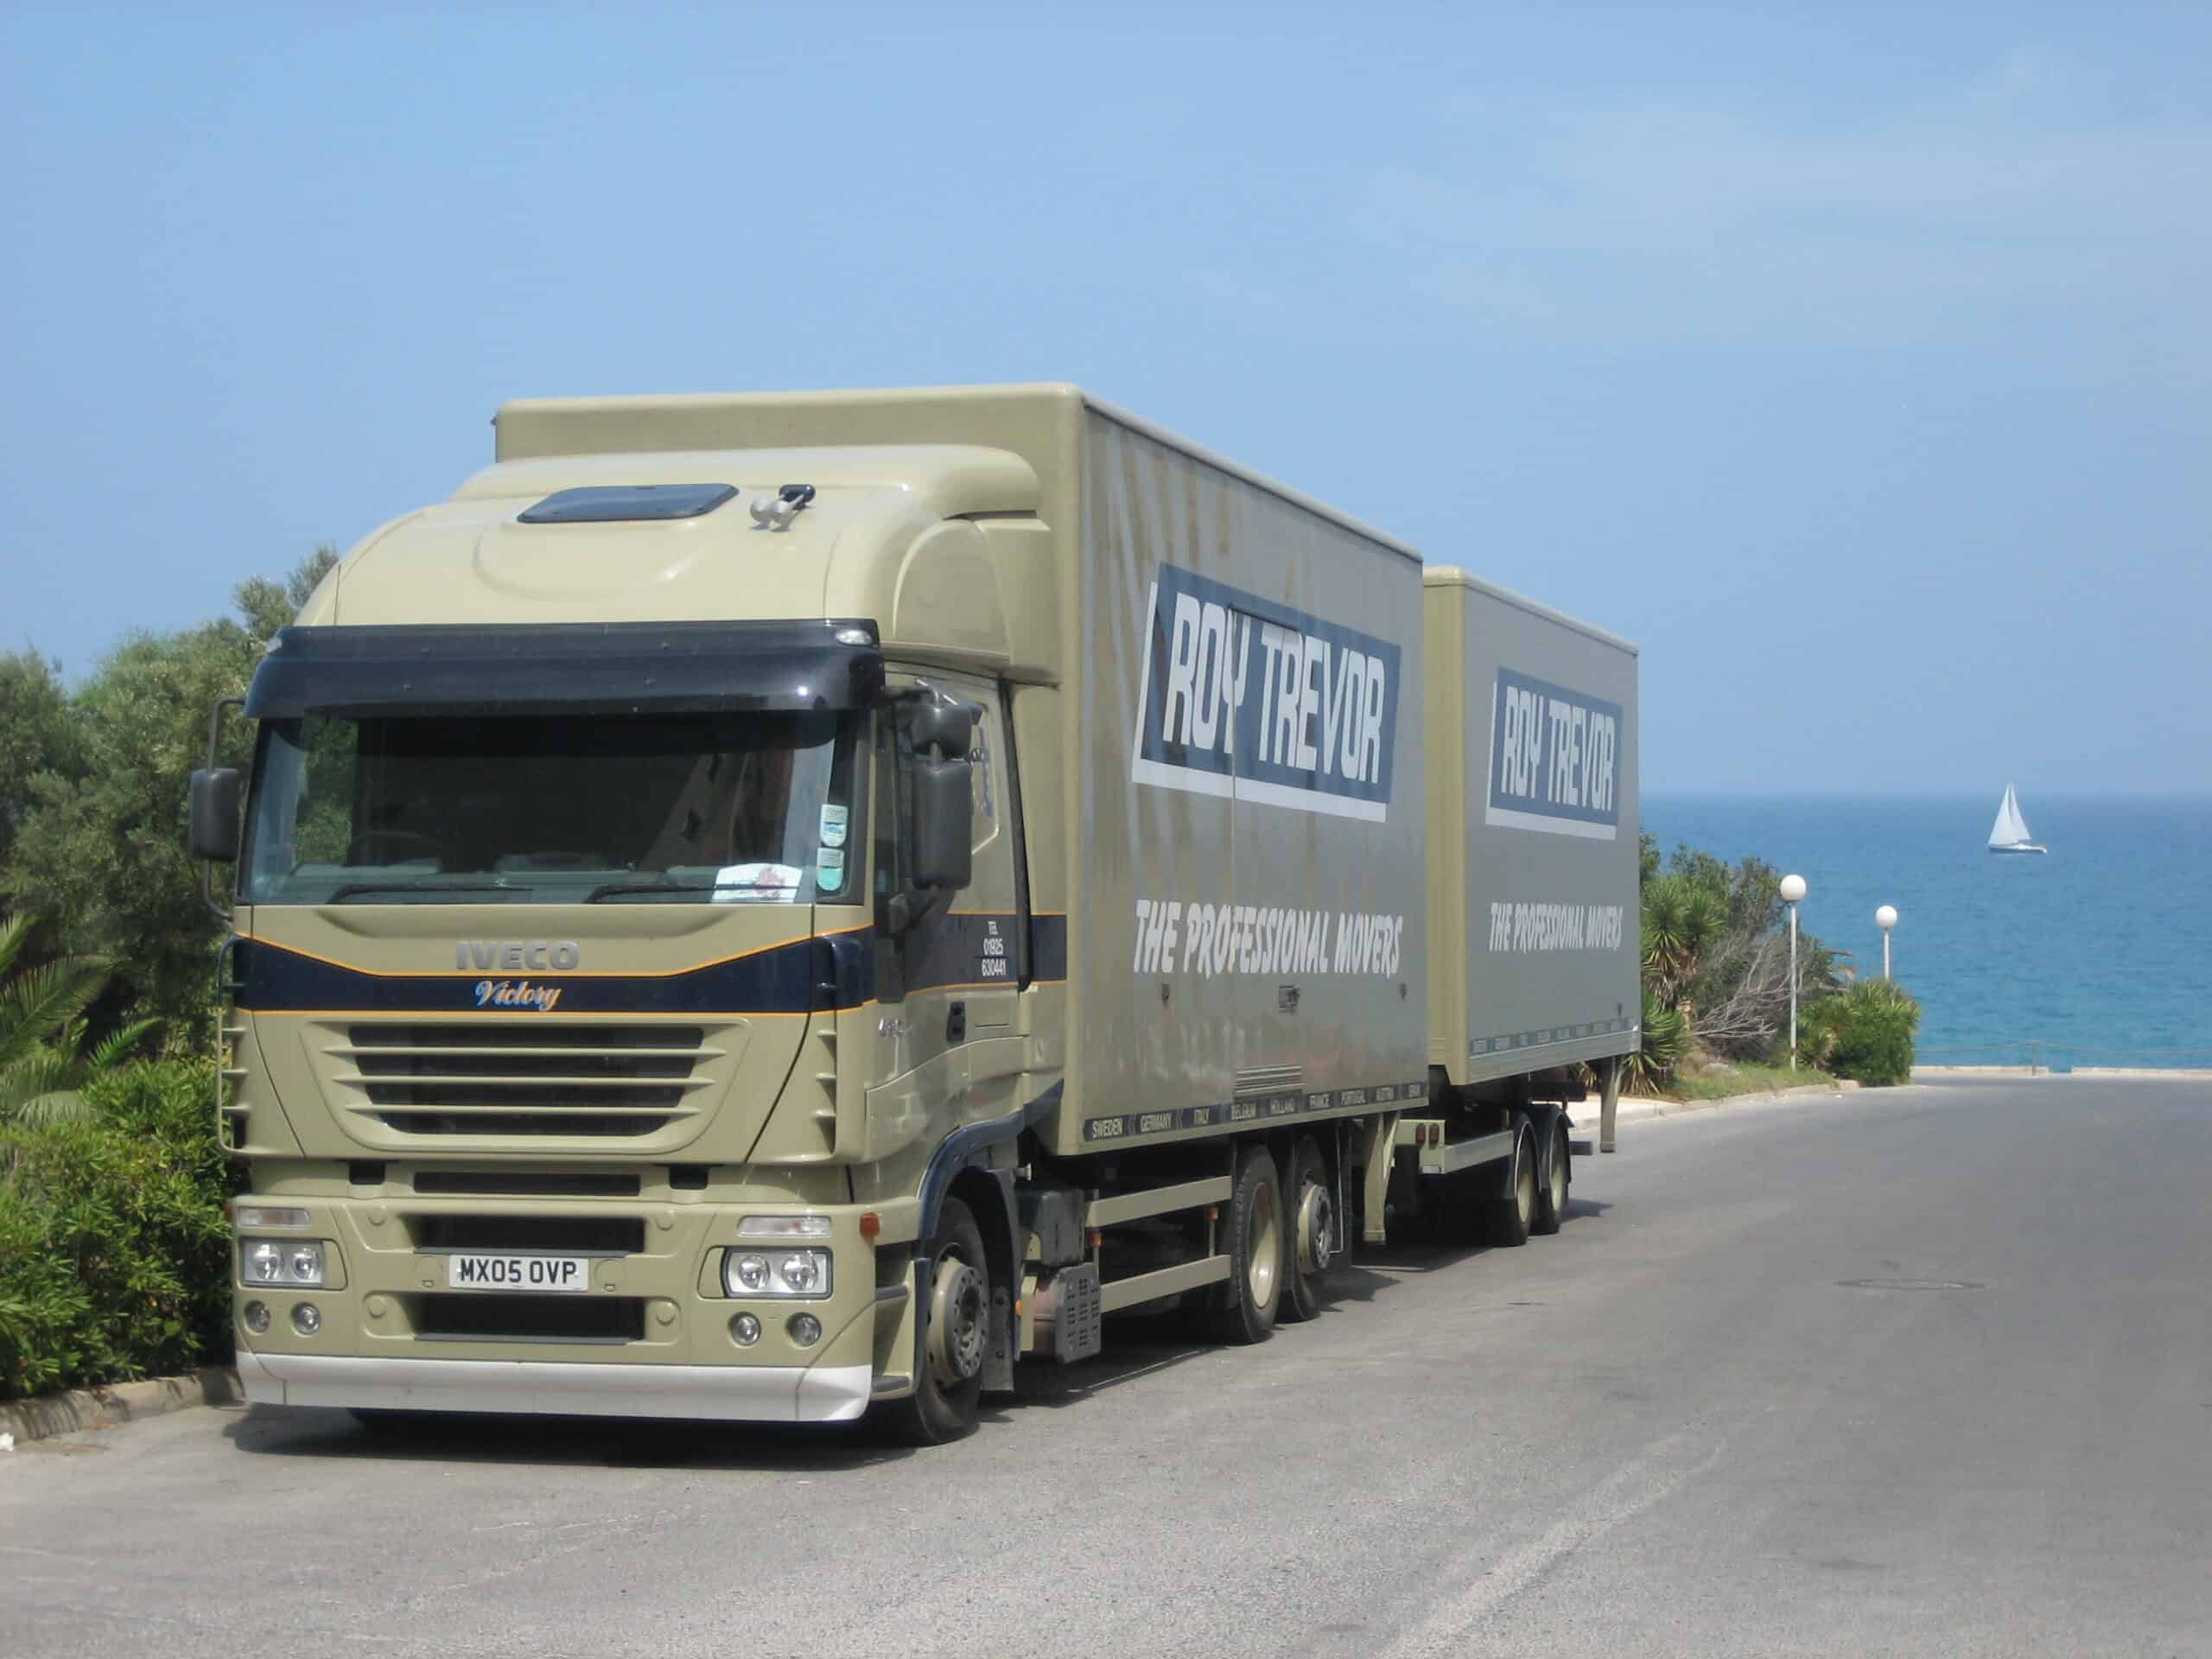 Roy Trevor vehicles driving in Europe near the sea